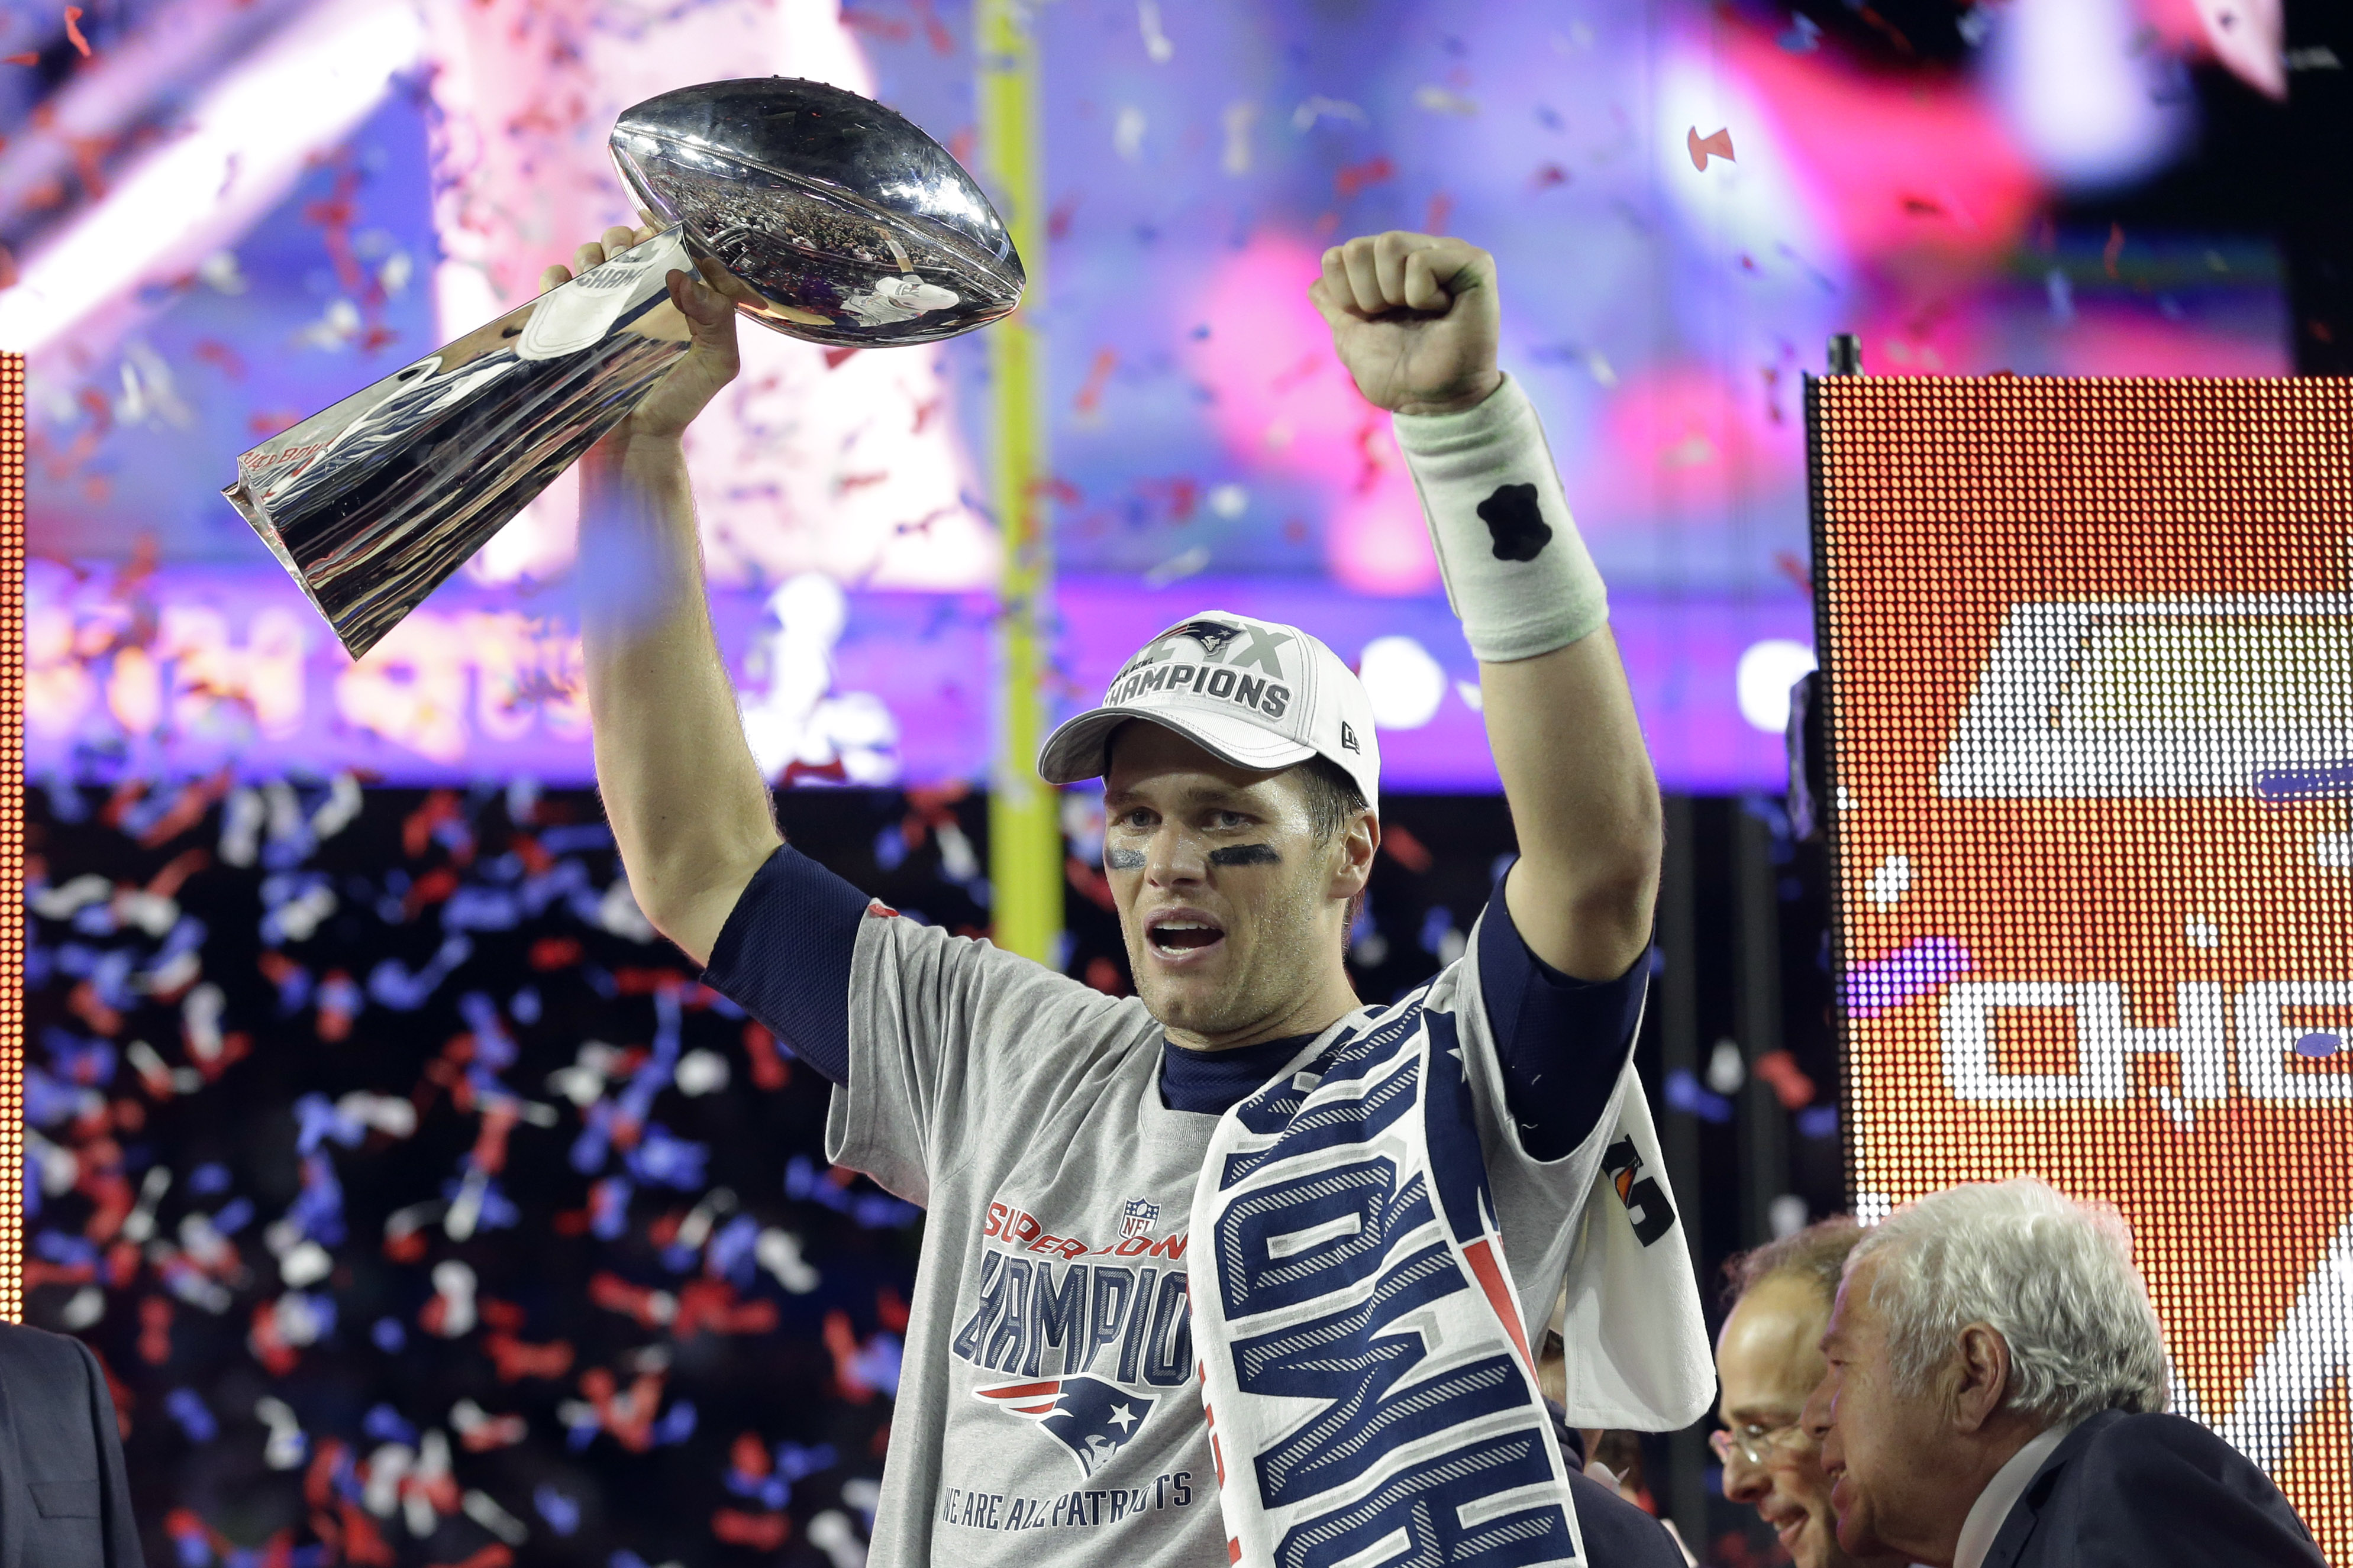 Celebrate Patriots Super Bowl victory with official championship gear